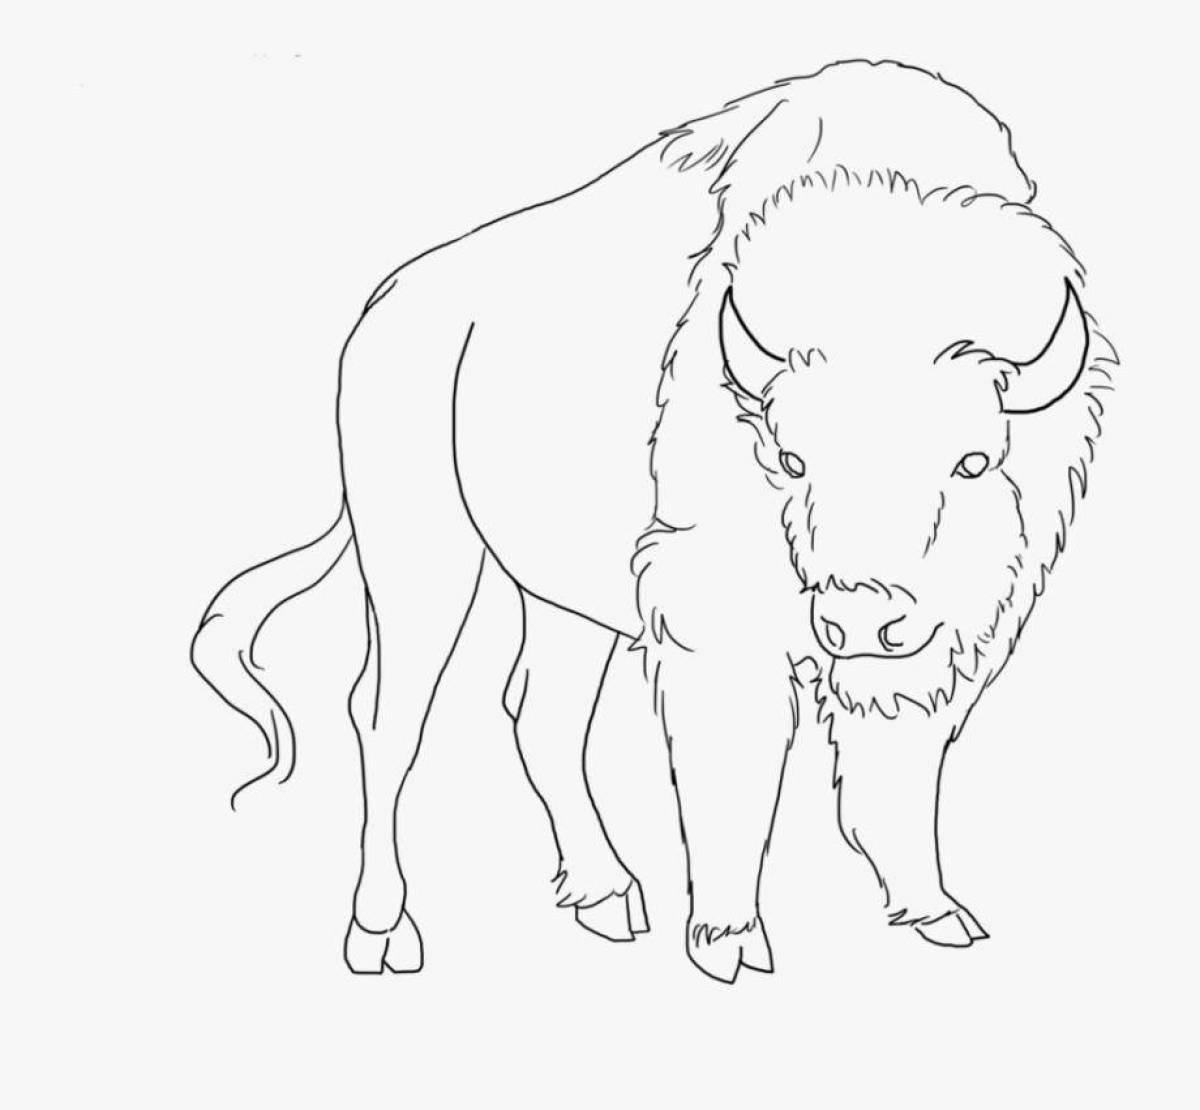 Fairy bison coloring pages for kids